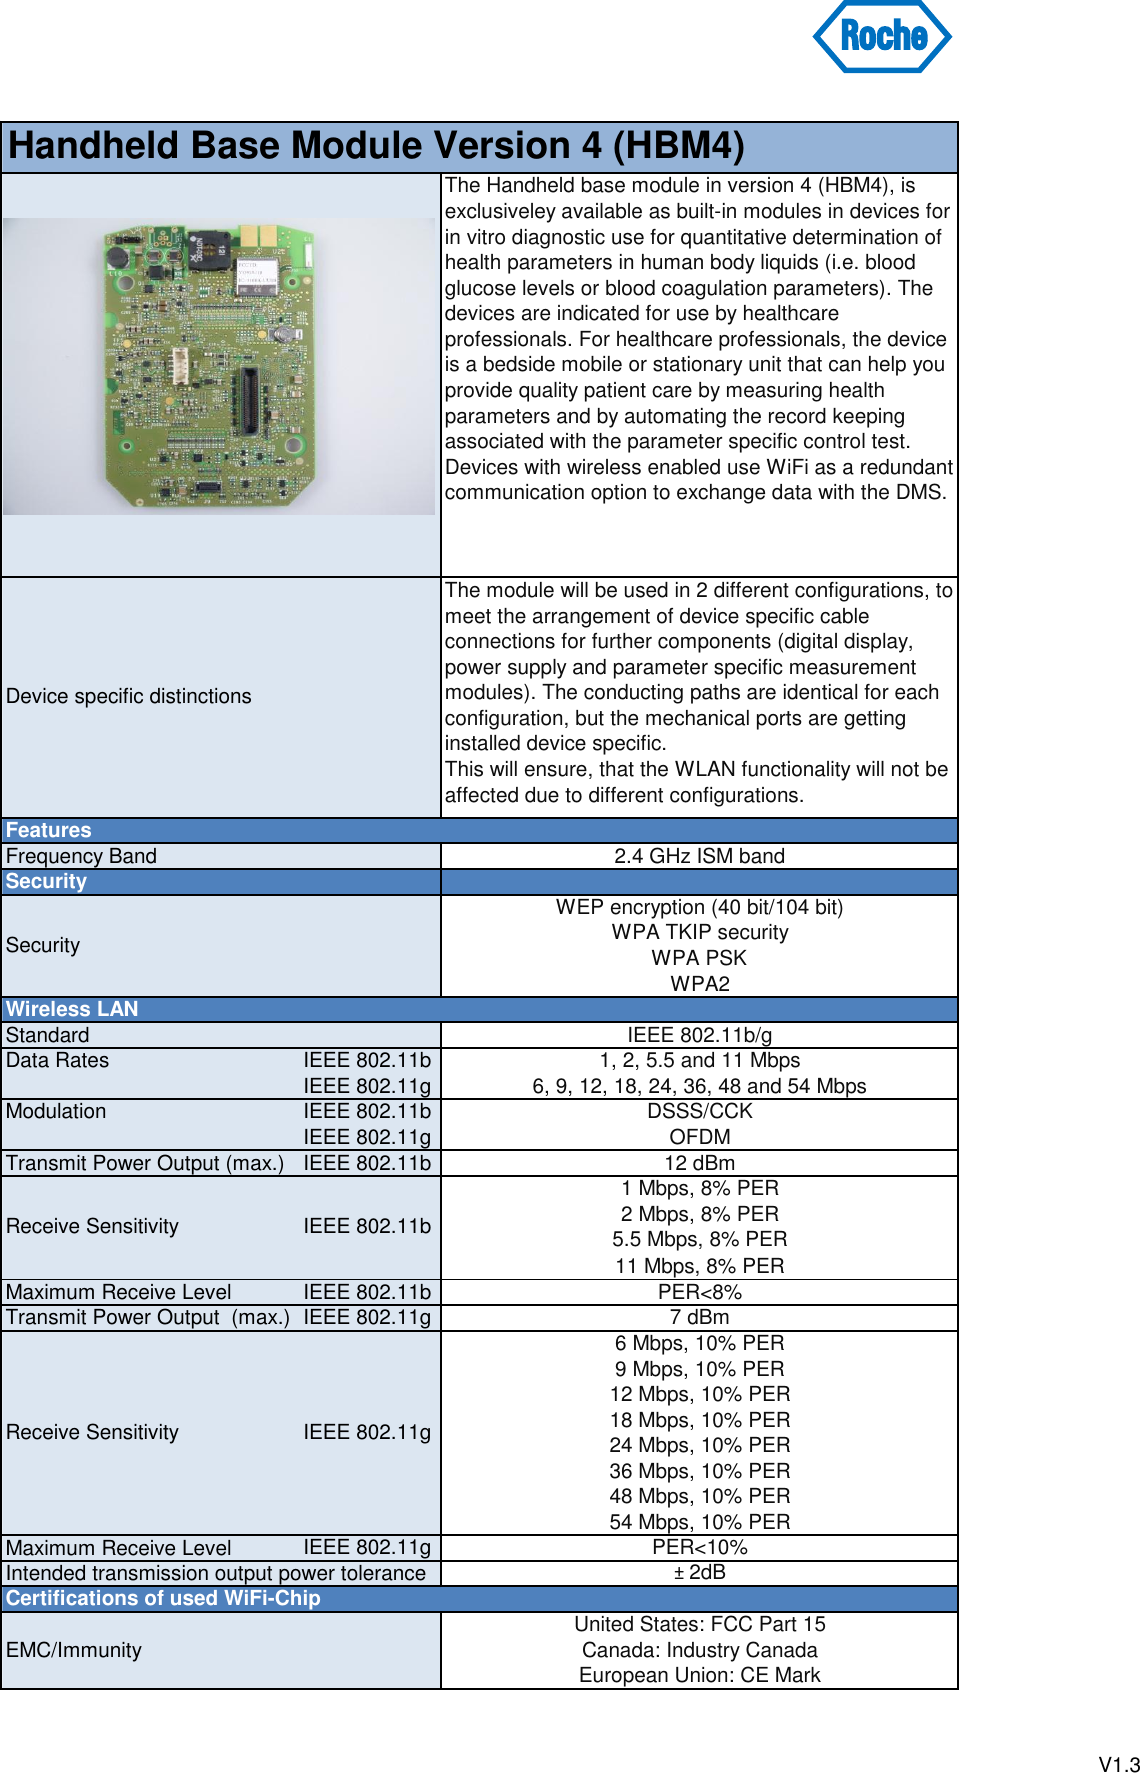 Frequency BandStandardData Rates IEEE 802.11bIEEE 802.11gModulation IEEE 802.11bIEEE 802.11gTransmit Power Output (max.) IEEE 802.11bMaximum Receive Level IEEE 802.11bTransmit Power Output  (max.) IEEE 802.11gMaximum Receive Level IEEE 802.11gIntended transmission output power toleranceEMC/Immunity± 2dBCanada: Industry CanadaEuropean Union: CE MarkHandheld Base Module Version 4 (HBM4)24 Mbps, 10% PER36 Mbps, 10% PER48 Mbps, 10% PER54 Mbps, 10% PERPER&lt;10%United States: FCC Part 15PER&lt;8%7 dBm6 Mbps, 10% PER9 Mbps, 10% PER12 Mbps, 10% PER18 Mbps, 10% PEROFDM12 dBm1 Mbps, 8% PER2 Mbps, 8% PER5.5 Mbps, 8% PER11 Mbps, 8% PERReceive SensitivityIEEE 802.11gCertifications of used WiFi-ChipThe Handheld base module in version 4 (HBM4), is exclusiveley available as built-in modules in devices for in vitro diagnostic use for quantitative determination of health parameters in human body liquids (i.e. blood glucose levels or blood coagulation parameters). The devices are indicated for use by healthcare professionals. For healthcare professionals, the device is a bedside mobile or stationary unit that can help you provide quality patient care by measuring health parameters and by automating the record keeping associated with the parameter specific control test.Devices with wireless enabled use WiFi as a redundant communication option to exchange data with the DMS. 2.4 GHz ISM bandWEP encryption (40 bit/104 bit)WPA TKIP securityWPA2SecurityWireless LANReceive SensitivityIEEE 802.11bIEEE 802.11b/g1, 2, 5.5 and 11 Mbps6, 9, 12, 18, 24, 36, 48 and 54 MbpsDSSS/CCKrFeaturesWPA PSKSecurityDevice specific distinctionsThe module will be used in 2 different configurations, to meet the arrangement of device specific cable connections for further components (digital display, power supply and parameter specific measurement modules). The conducting paths are identical for each configuration, but the mechanical ports are getting installed device specific.This will ensure, that the WLAN functionality will not be affected due to different configurations.V1.3 